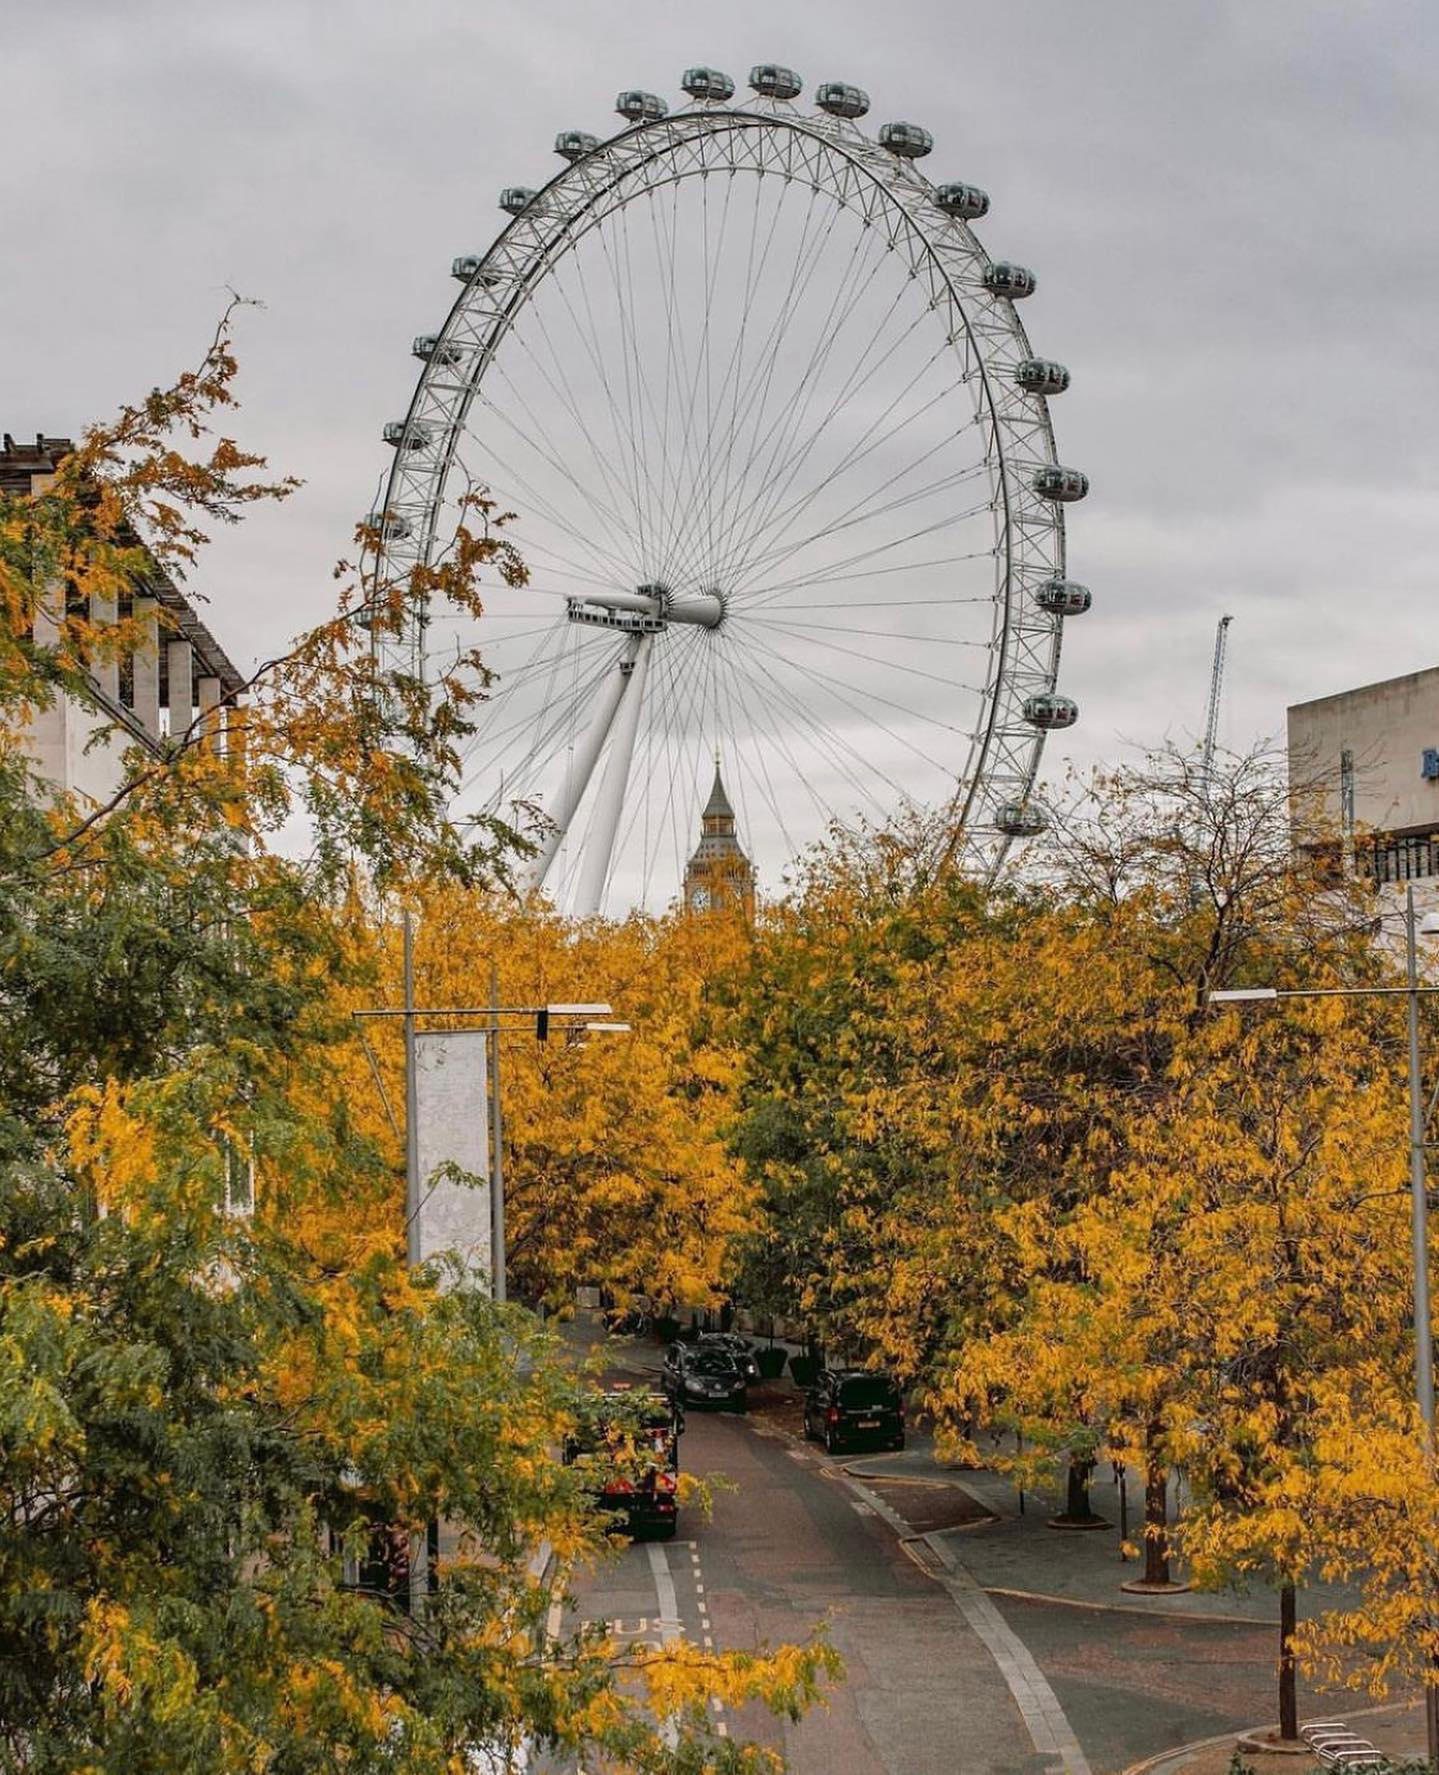 image  1 All Things England - Autumn in London by #lundonlens